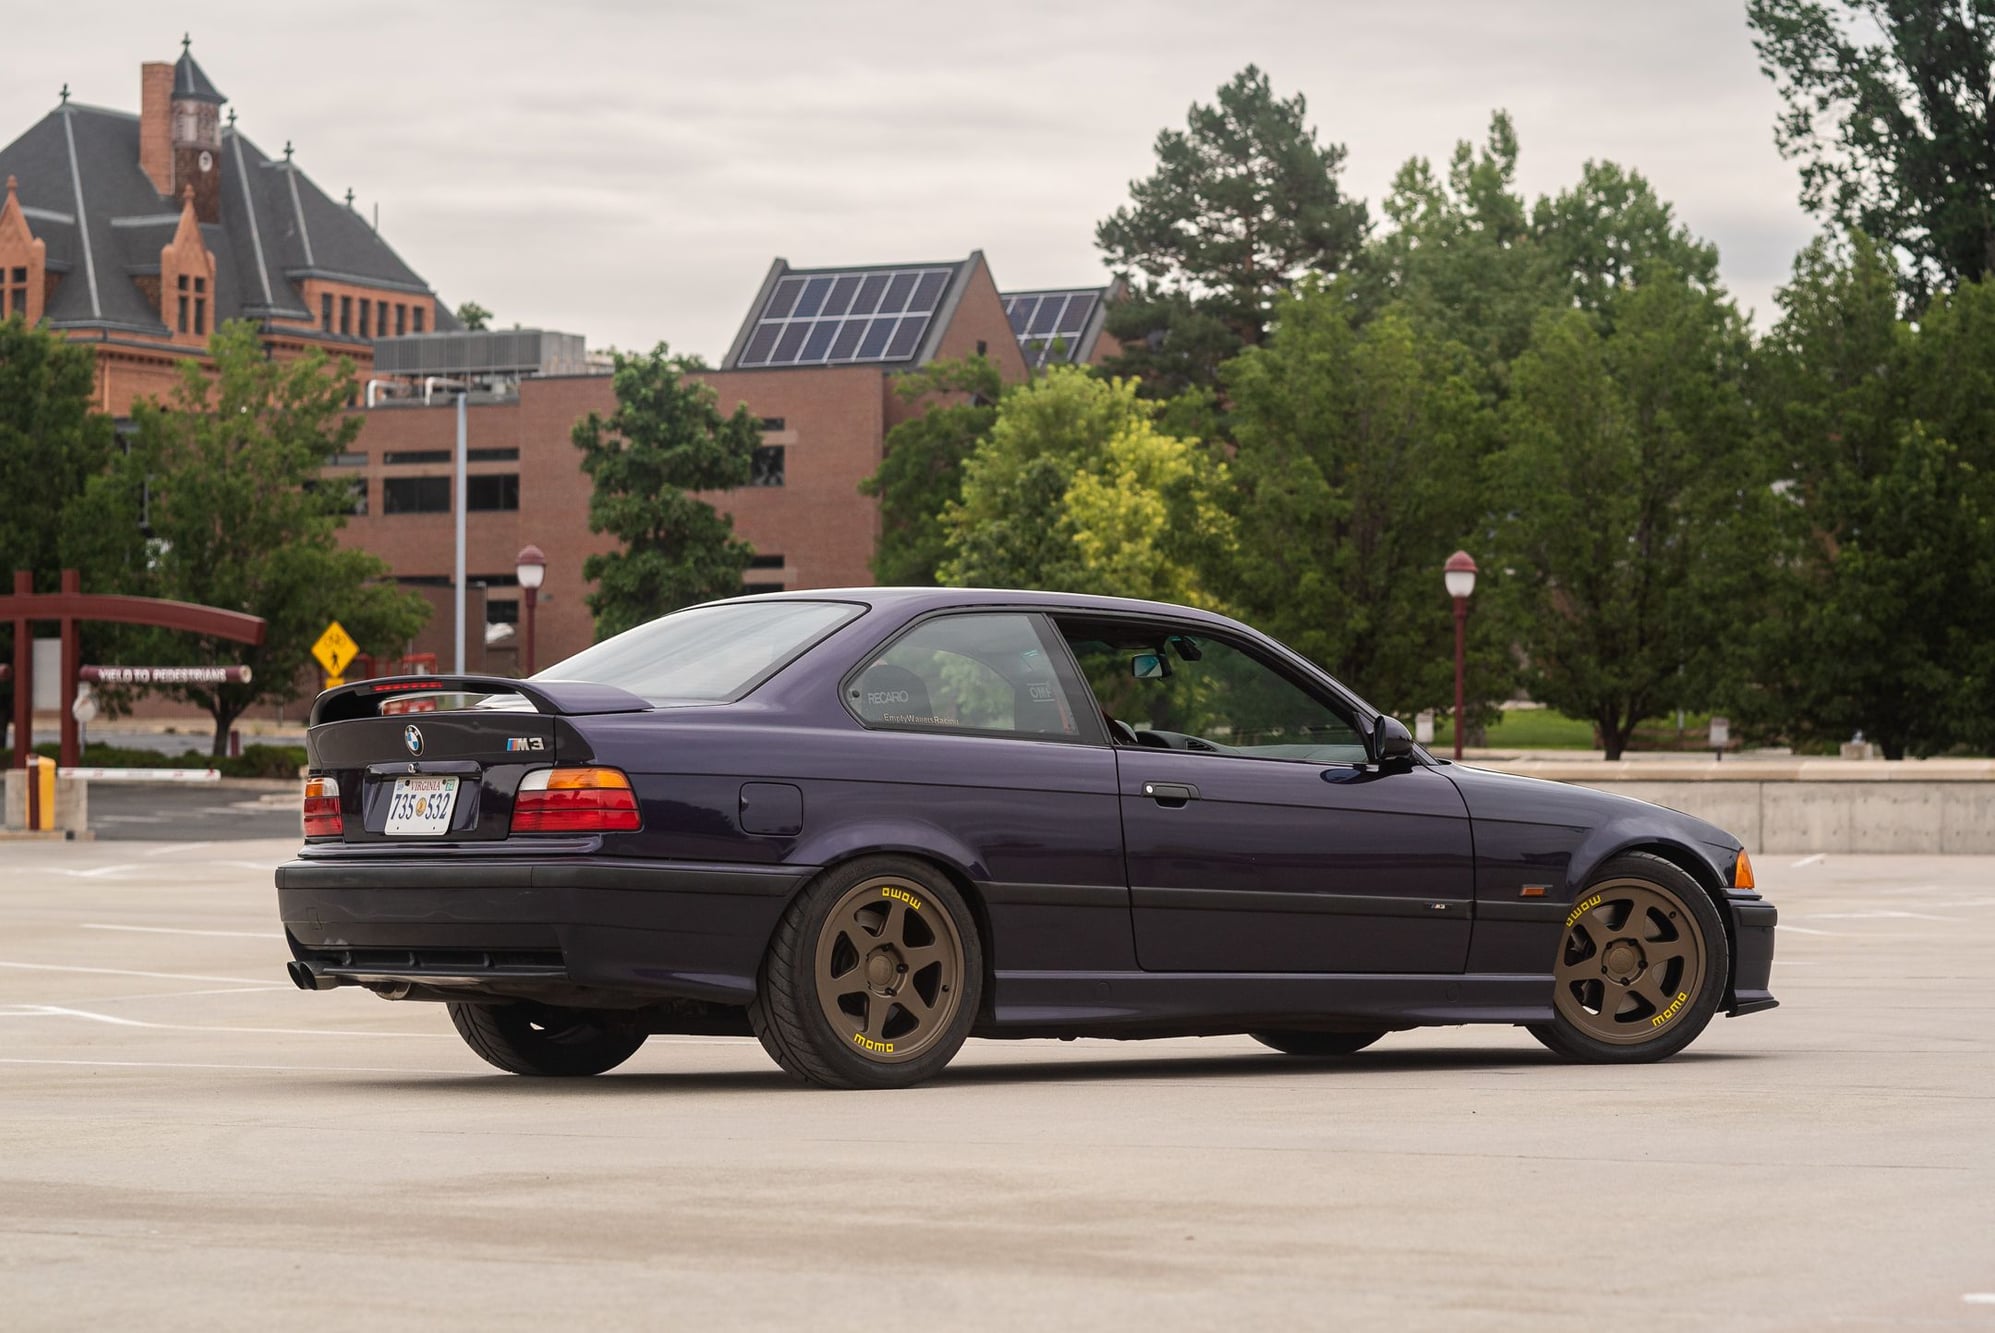 1996 BMW M3 - Ls1 5.7  t56 bmw m3 - Used - VIN WBSBG9327TEY73332 - 175,000 Miles - 8 cyl - 2WD - Manual - Coupe - Purple - Englewood, CO 80110, United States